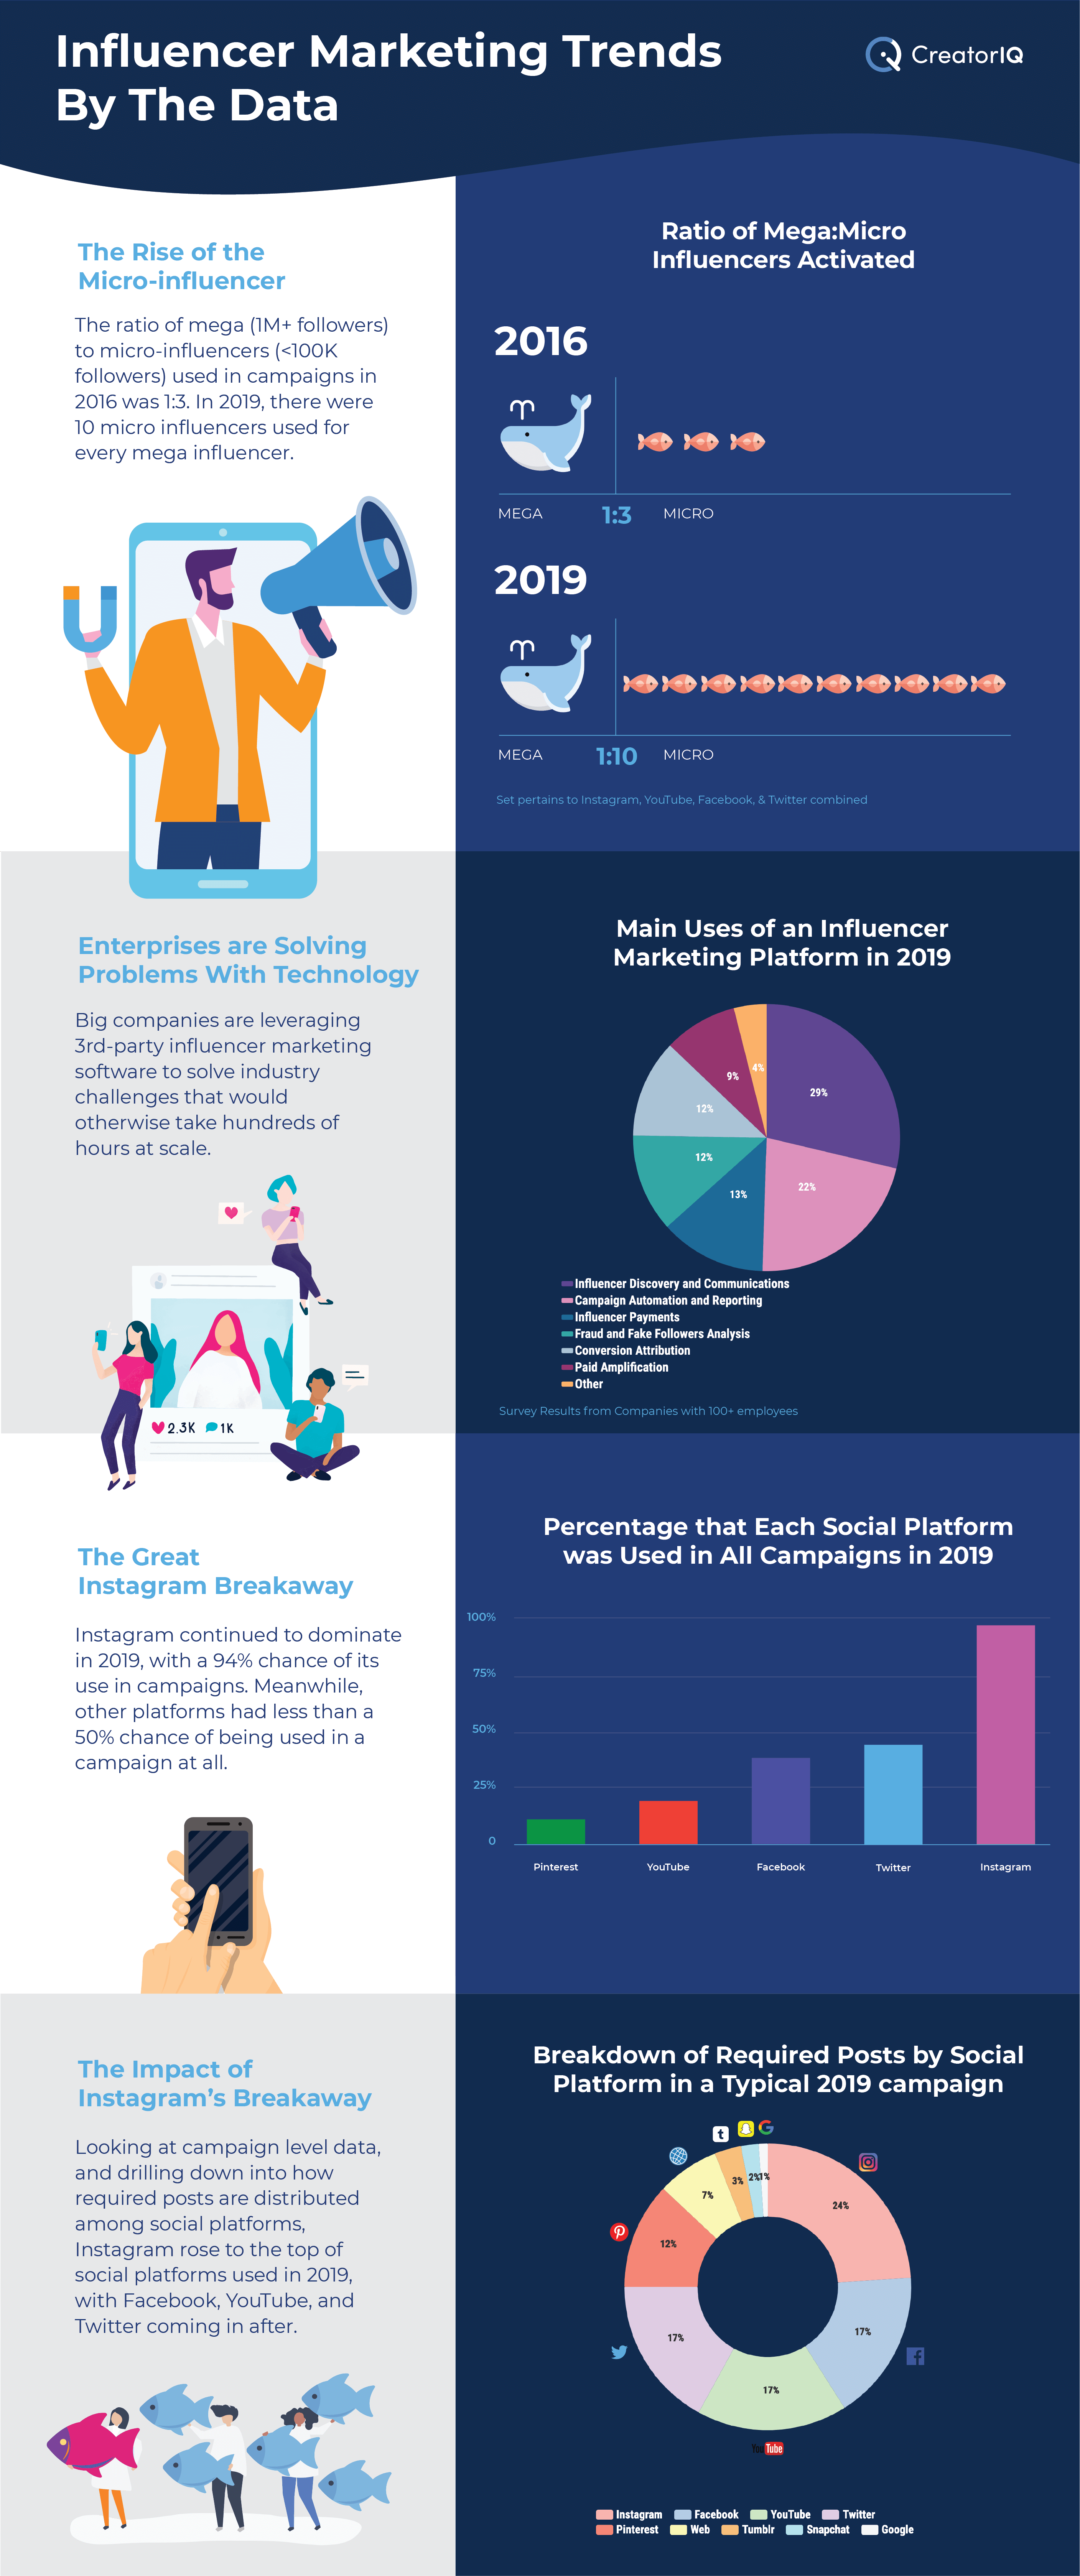 [Infographic] Influencer Marketing Trends, By The Data